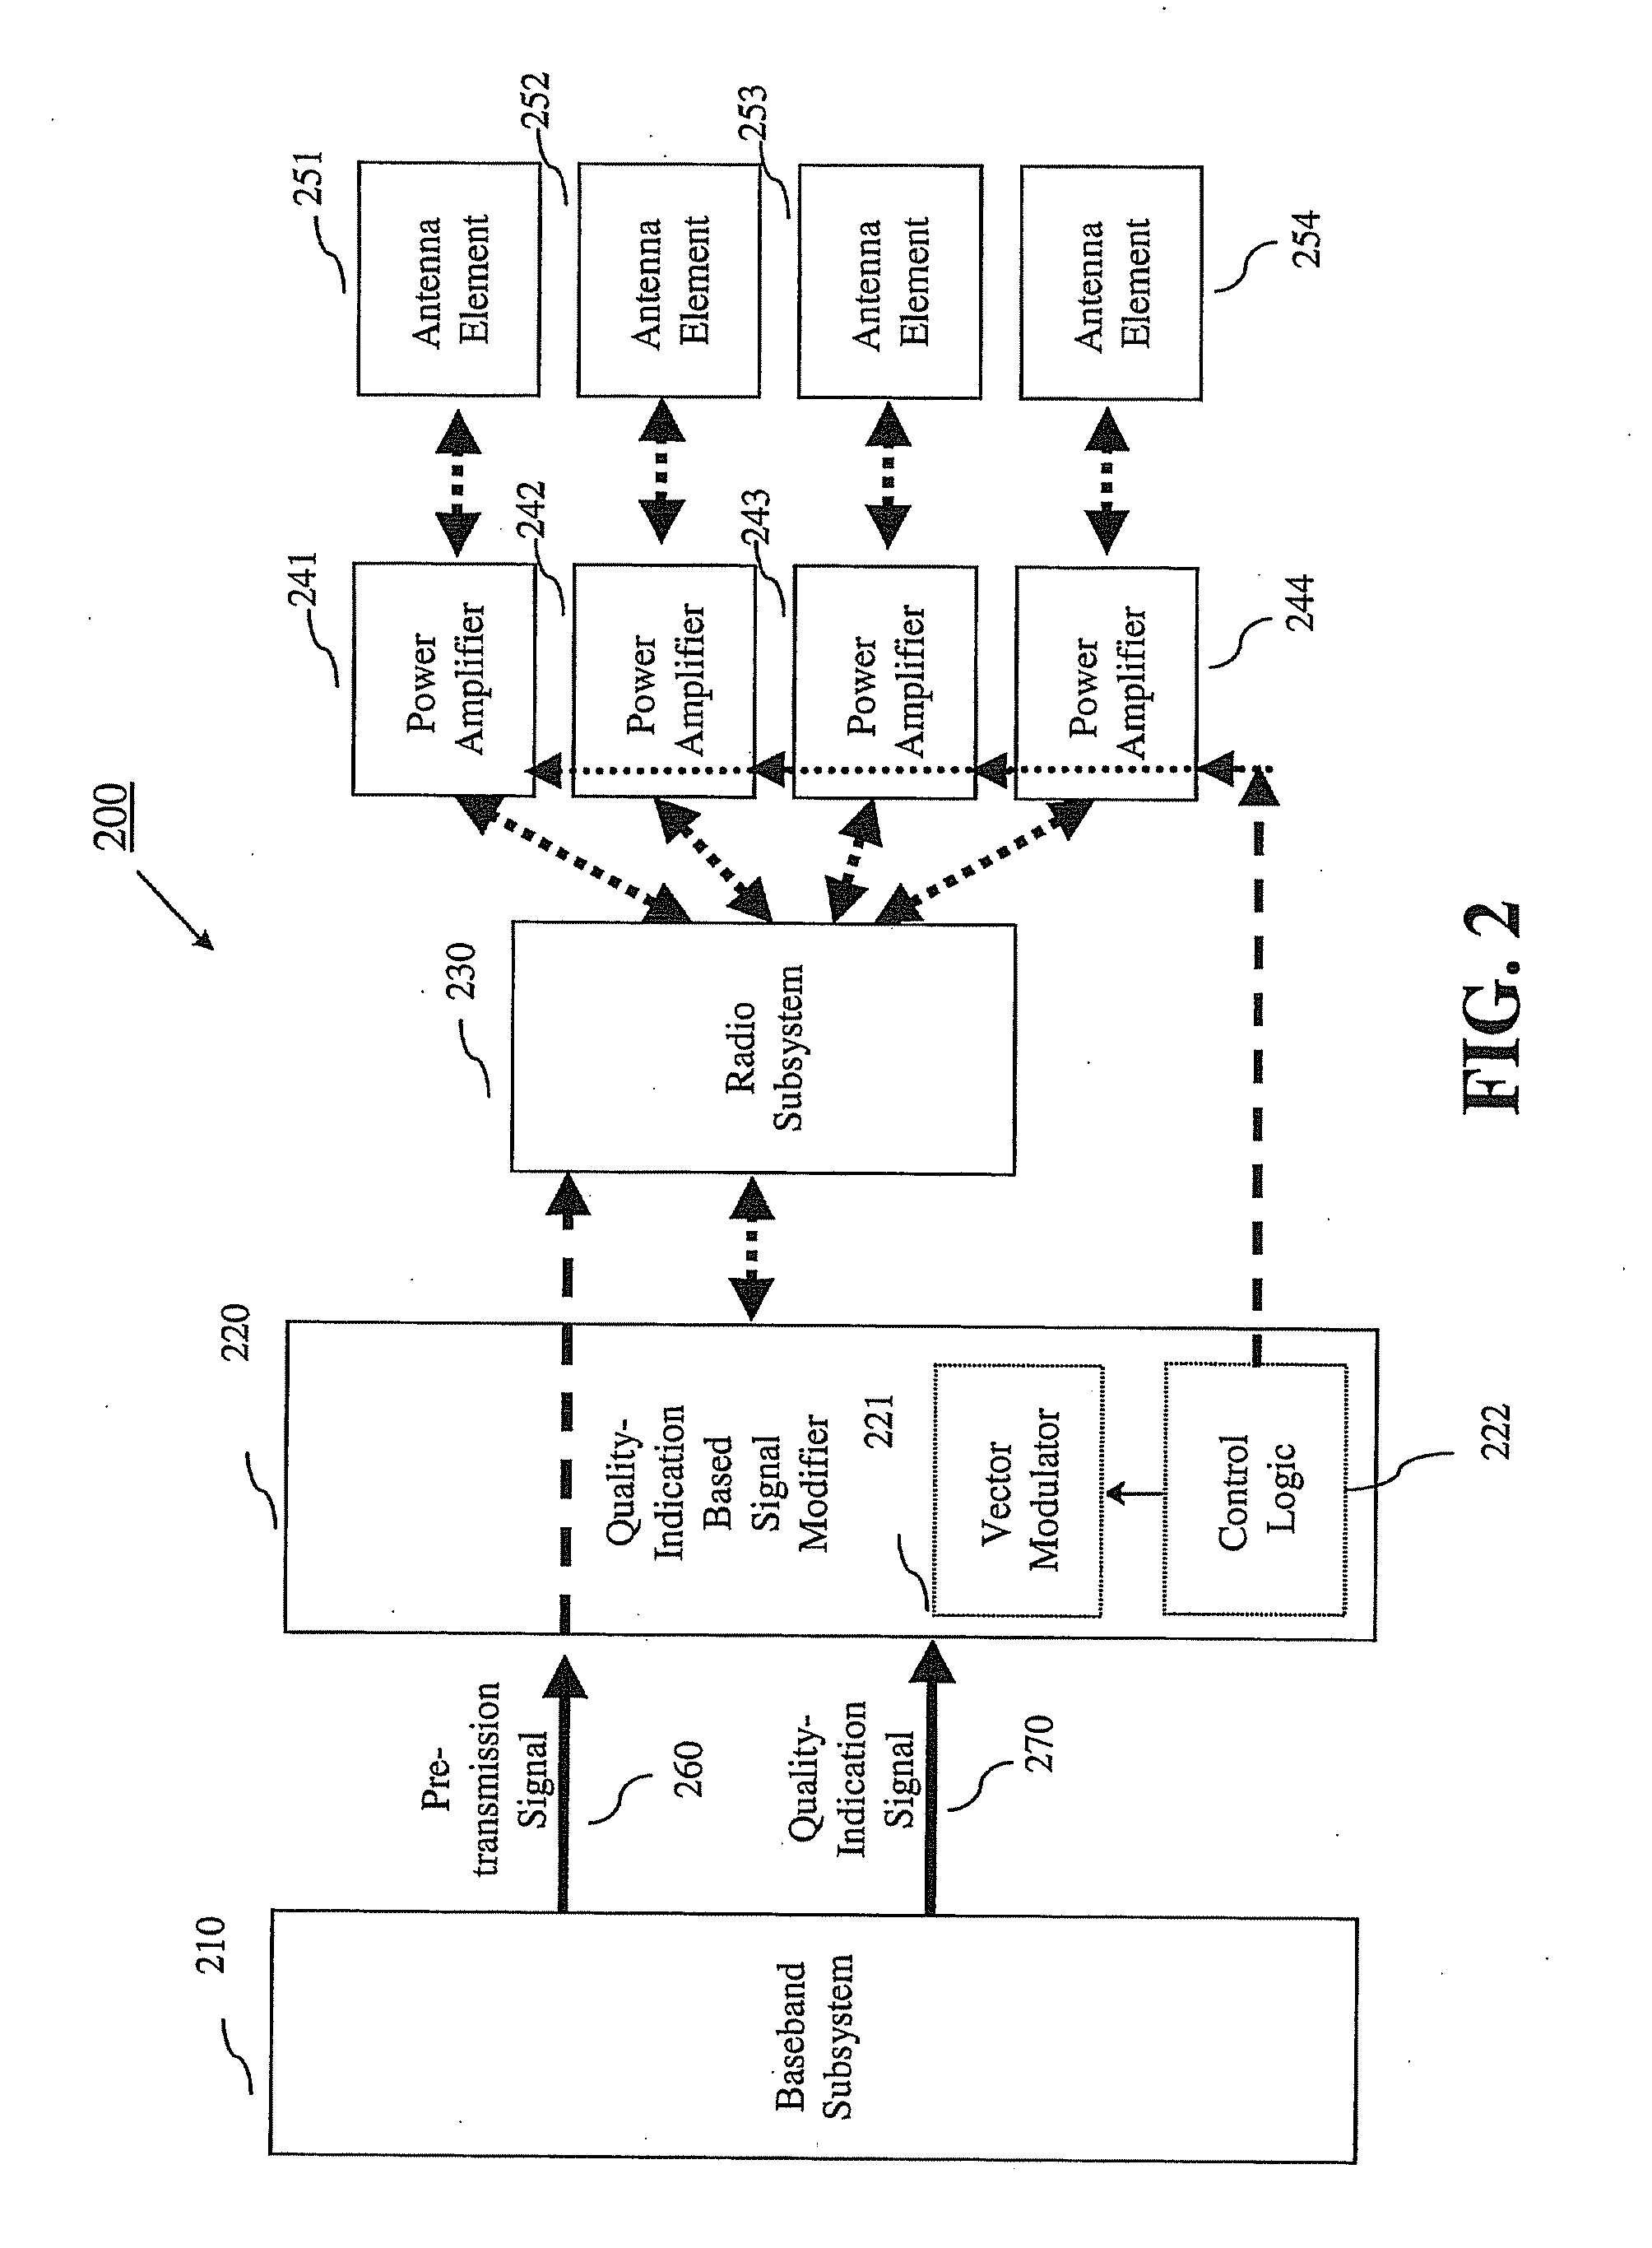 System, method and apparatus for mobile transmit diversity using symmetric phase difference